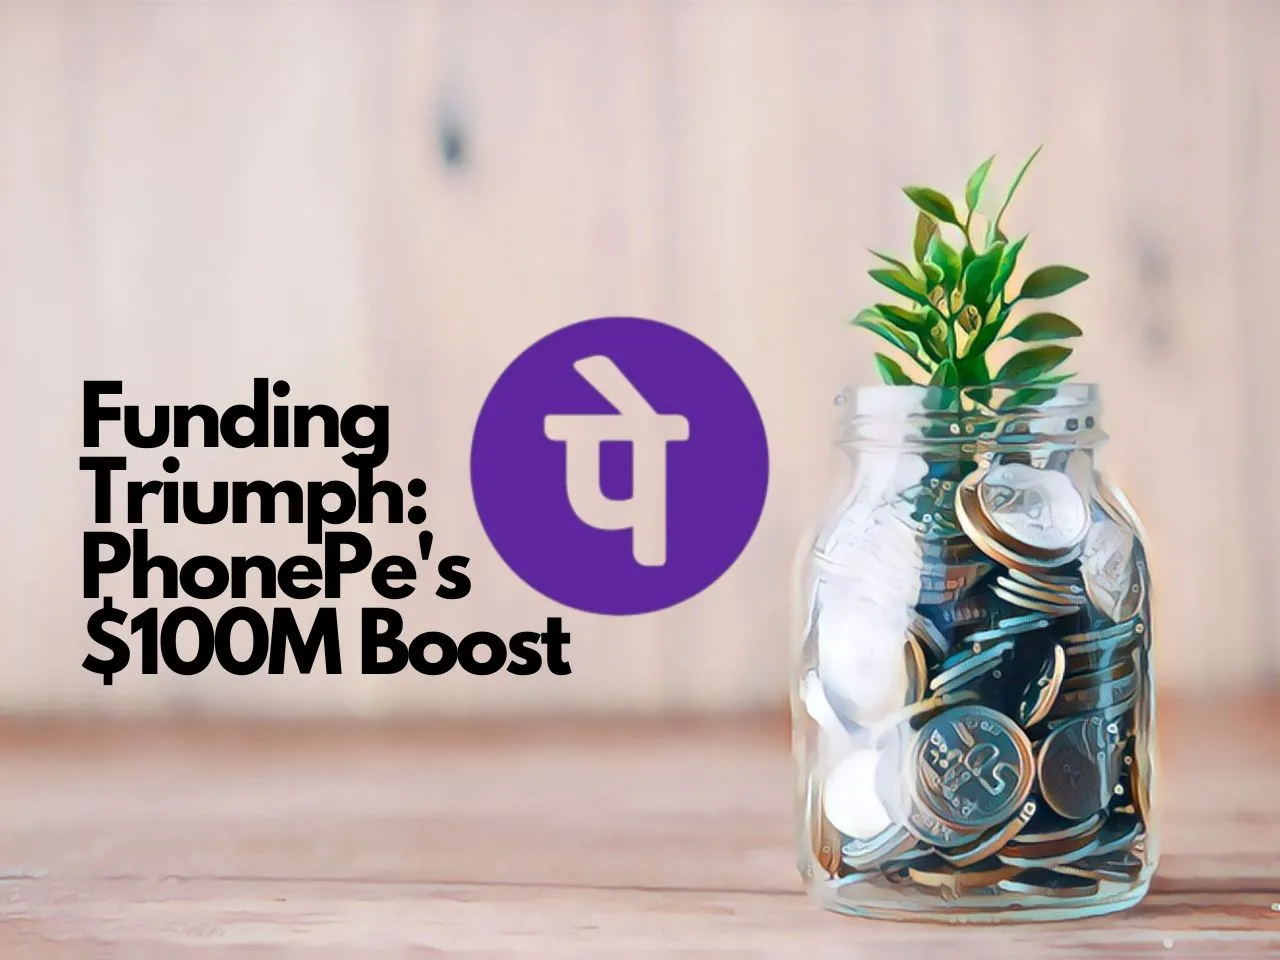 PhonePe Raises $100M, What's Driving PhonePe's Valuation Surge?